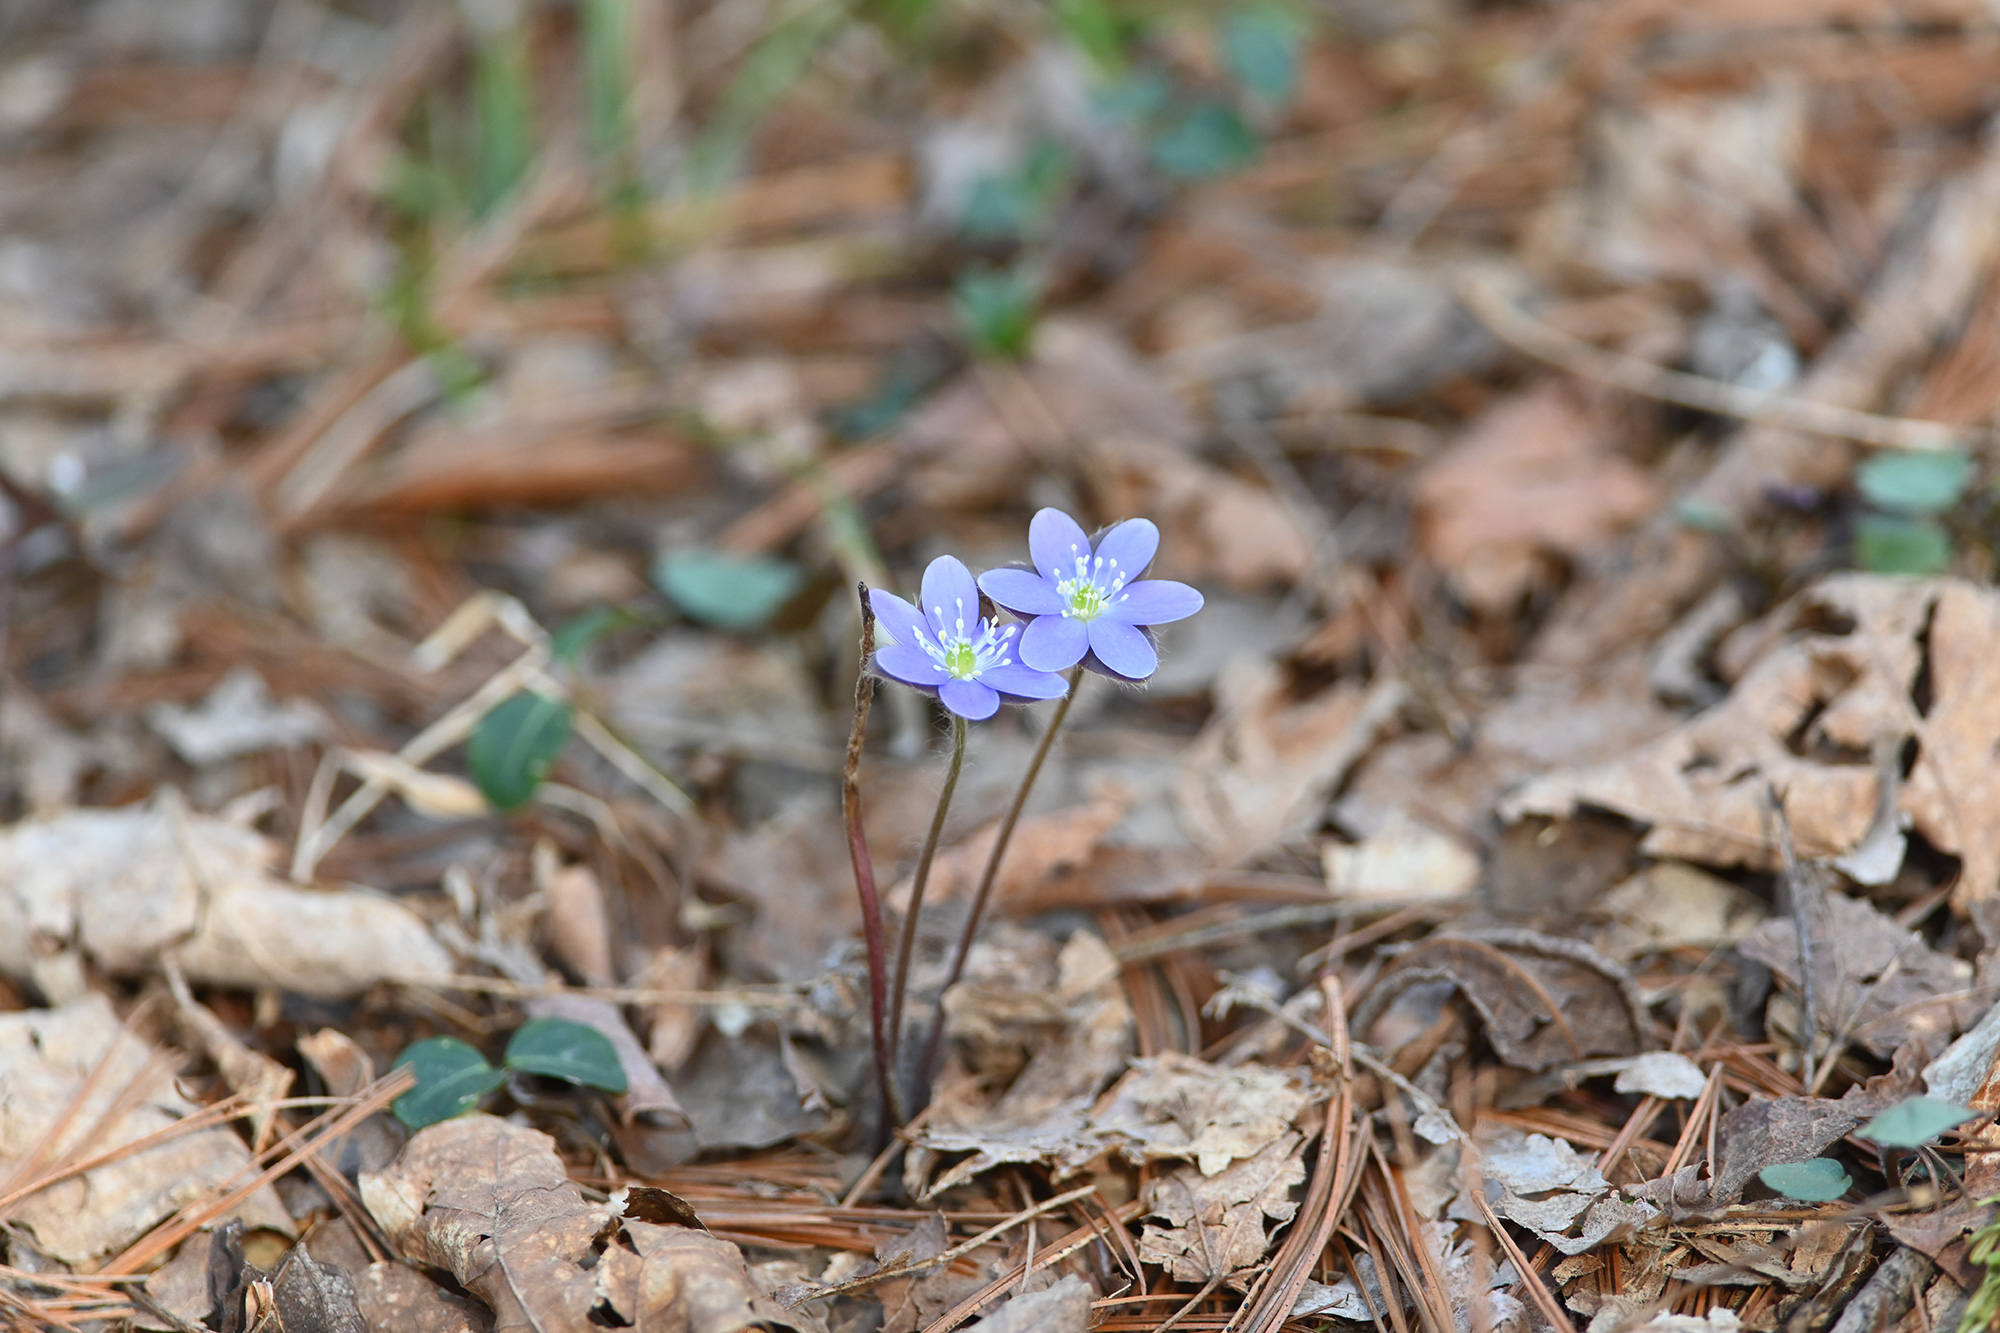 Hepatica flowers arise from the leaf litter.